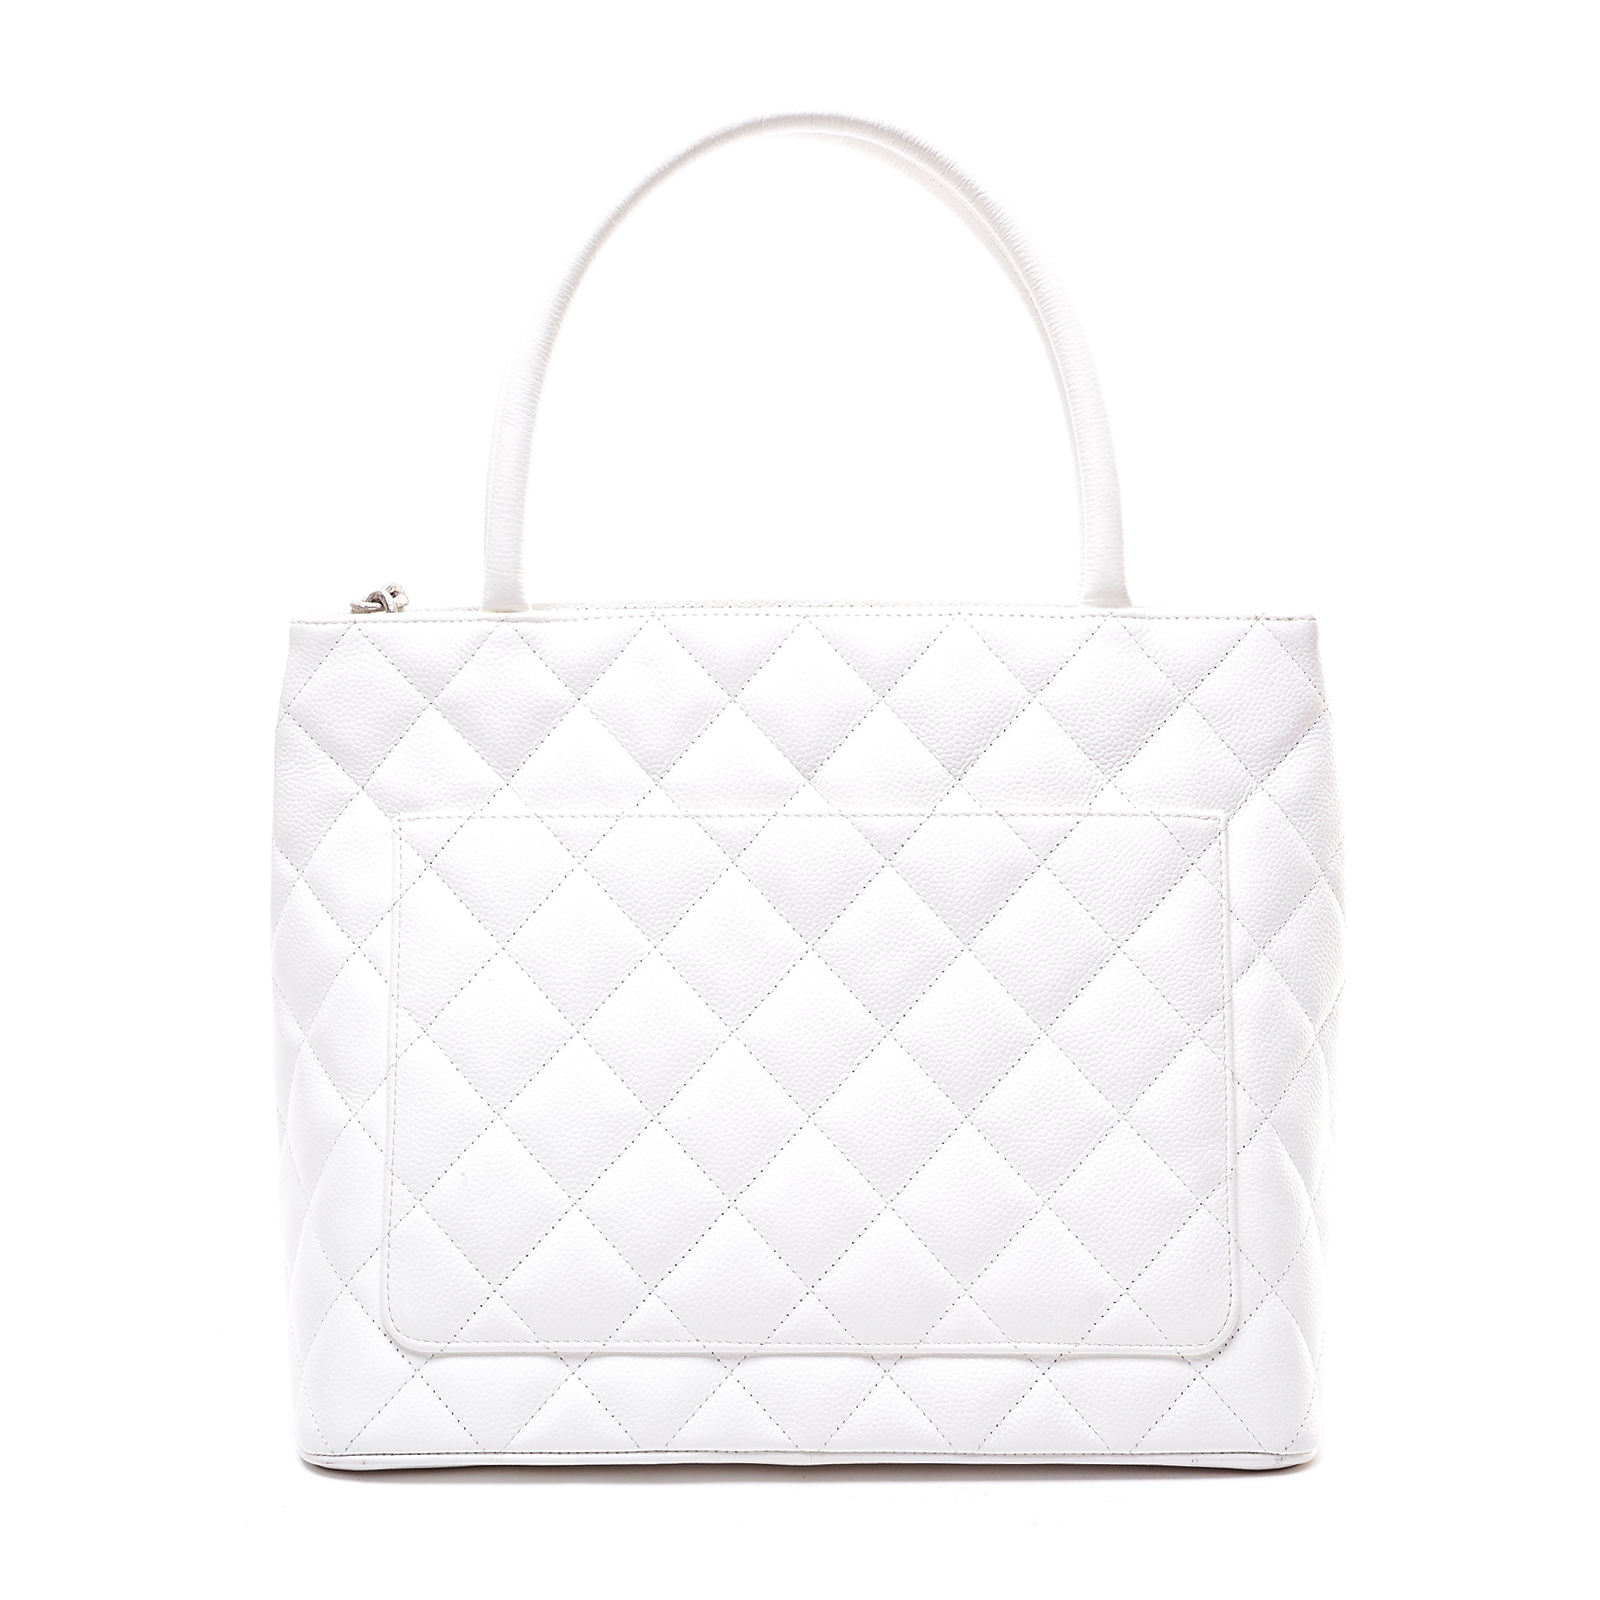 WHITE QUILTED CAVIAR LEATHER 'CC' LOGO SILVER TONED MEDALLION TOTE BAG